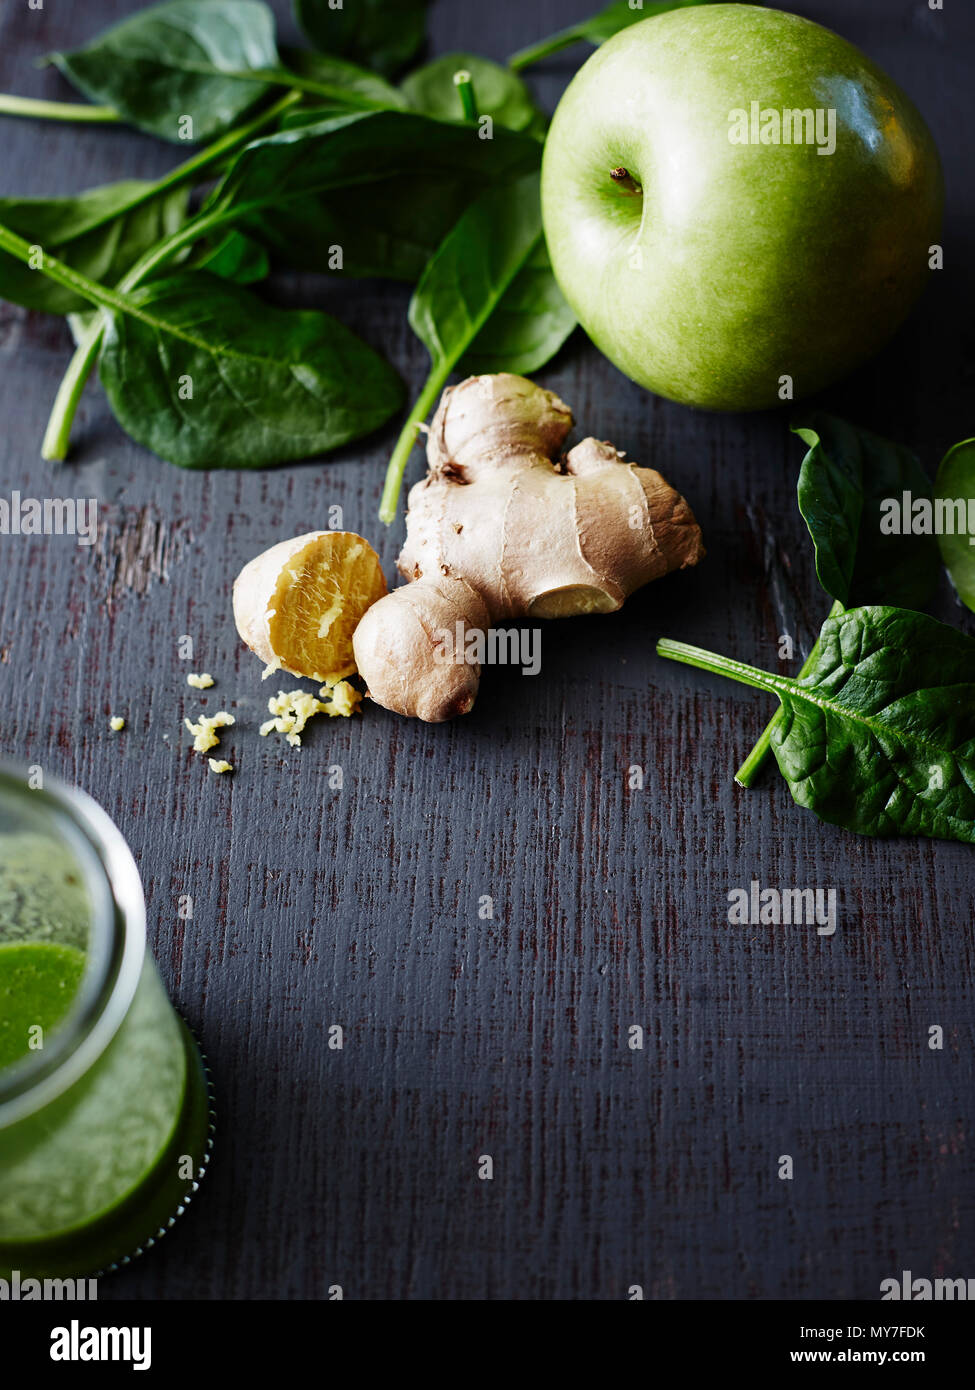 Still life of kale, apple. fresh ginger and basil leaves, close-up Stock Photo